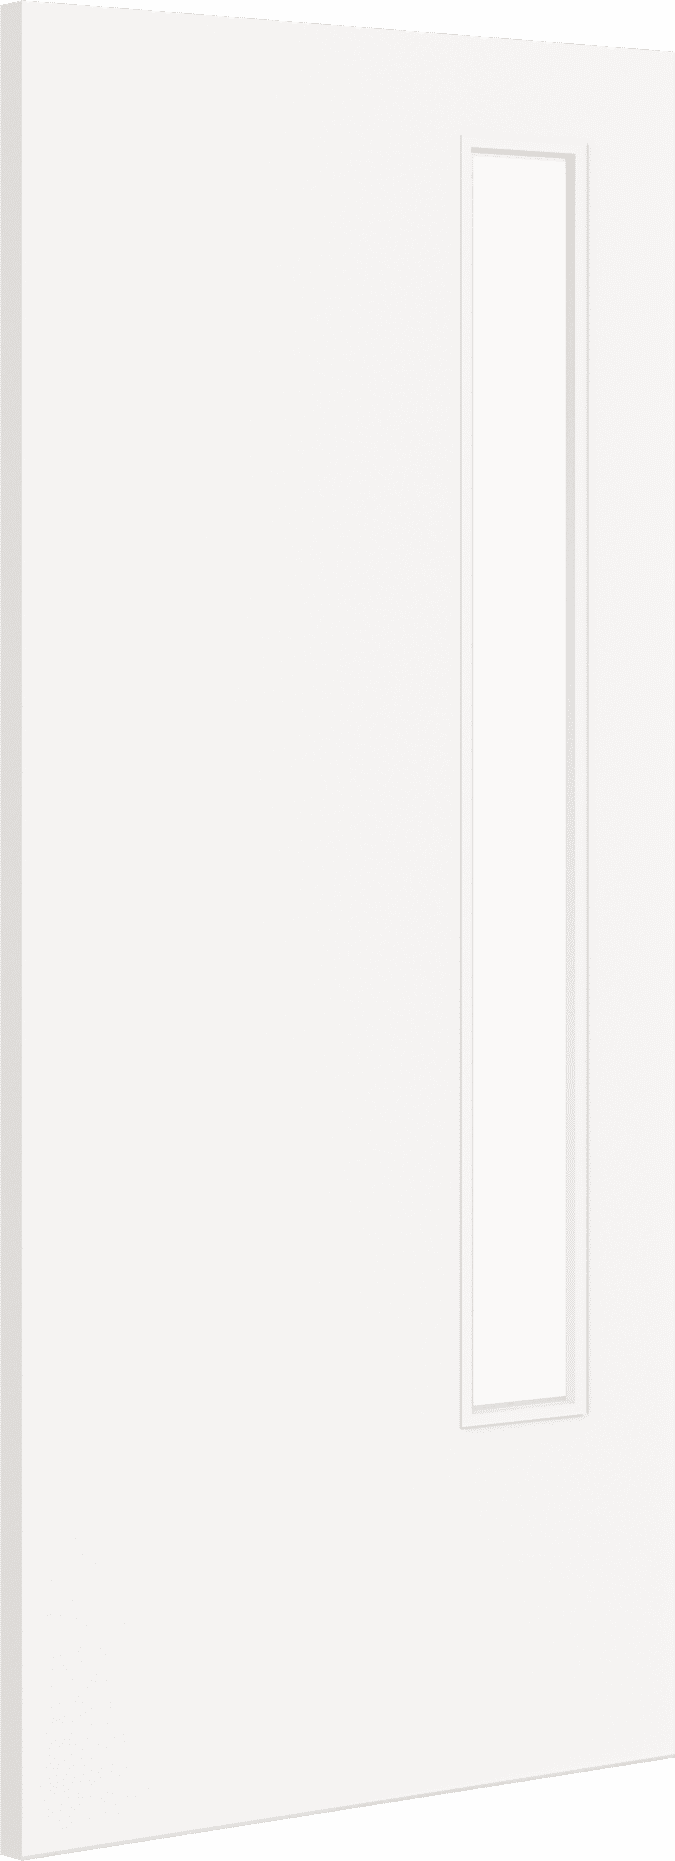 2040mm x 726mm x 44mm Architectural Paint Grade White 13 Clear Glazed Fire Door Blank